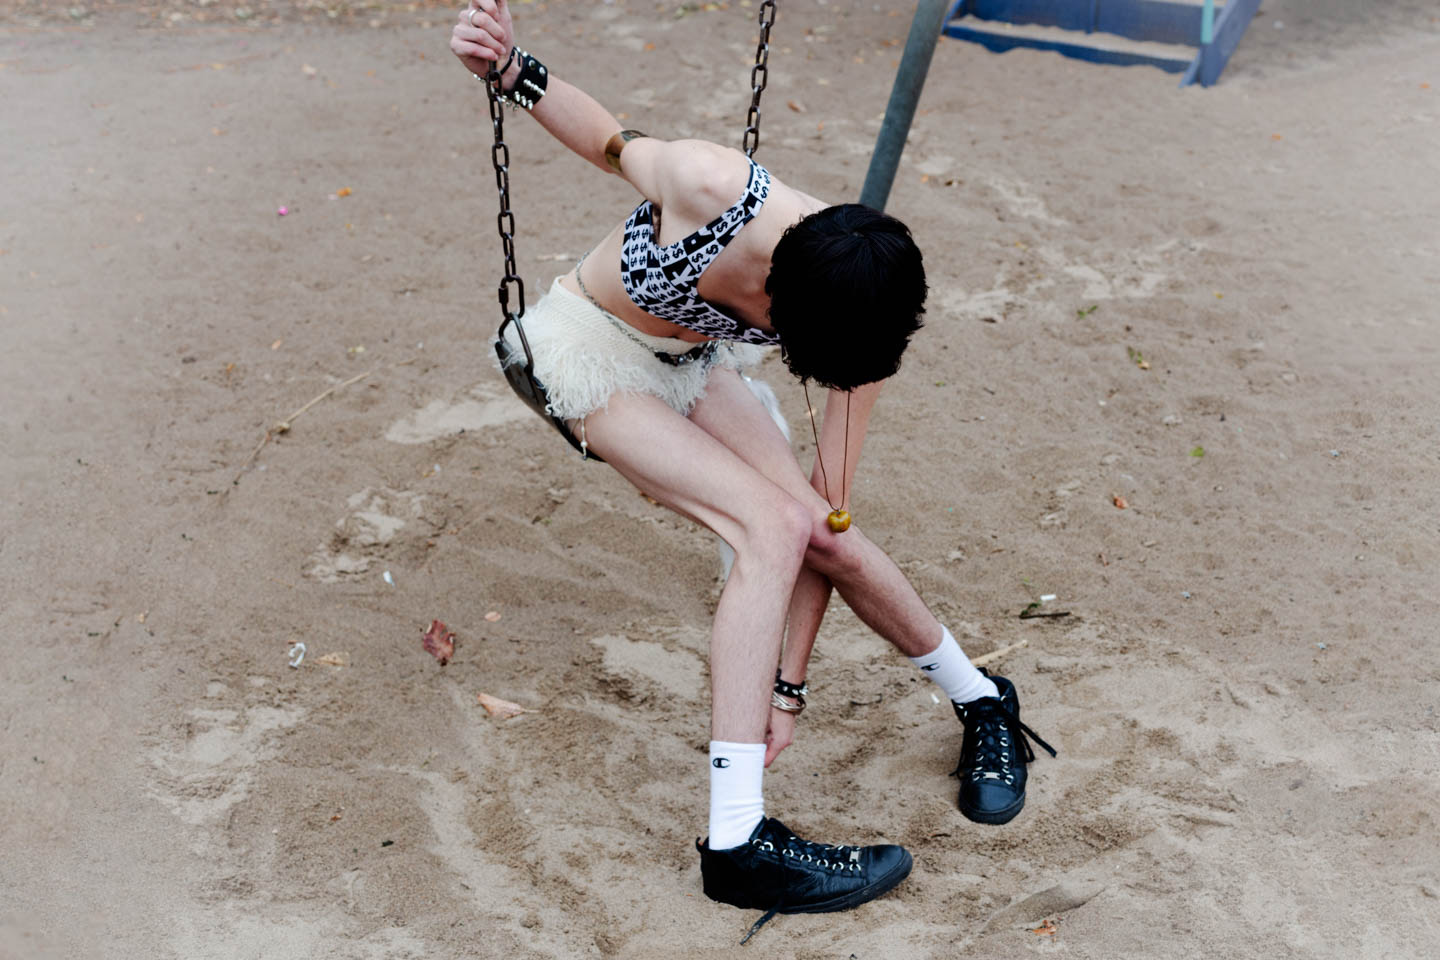 A person sits bent over on the swings in a sandpit as they adjust their socks.